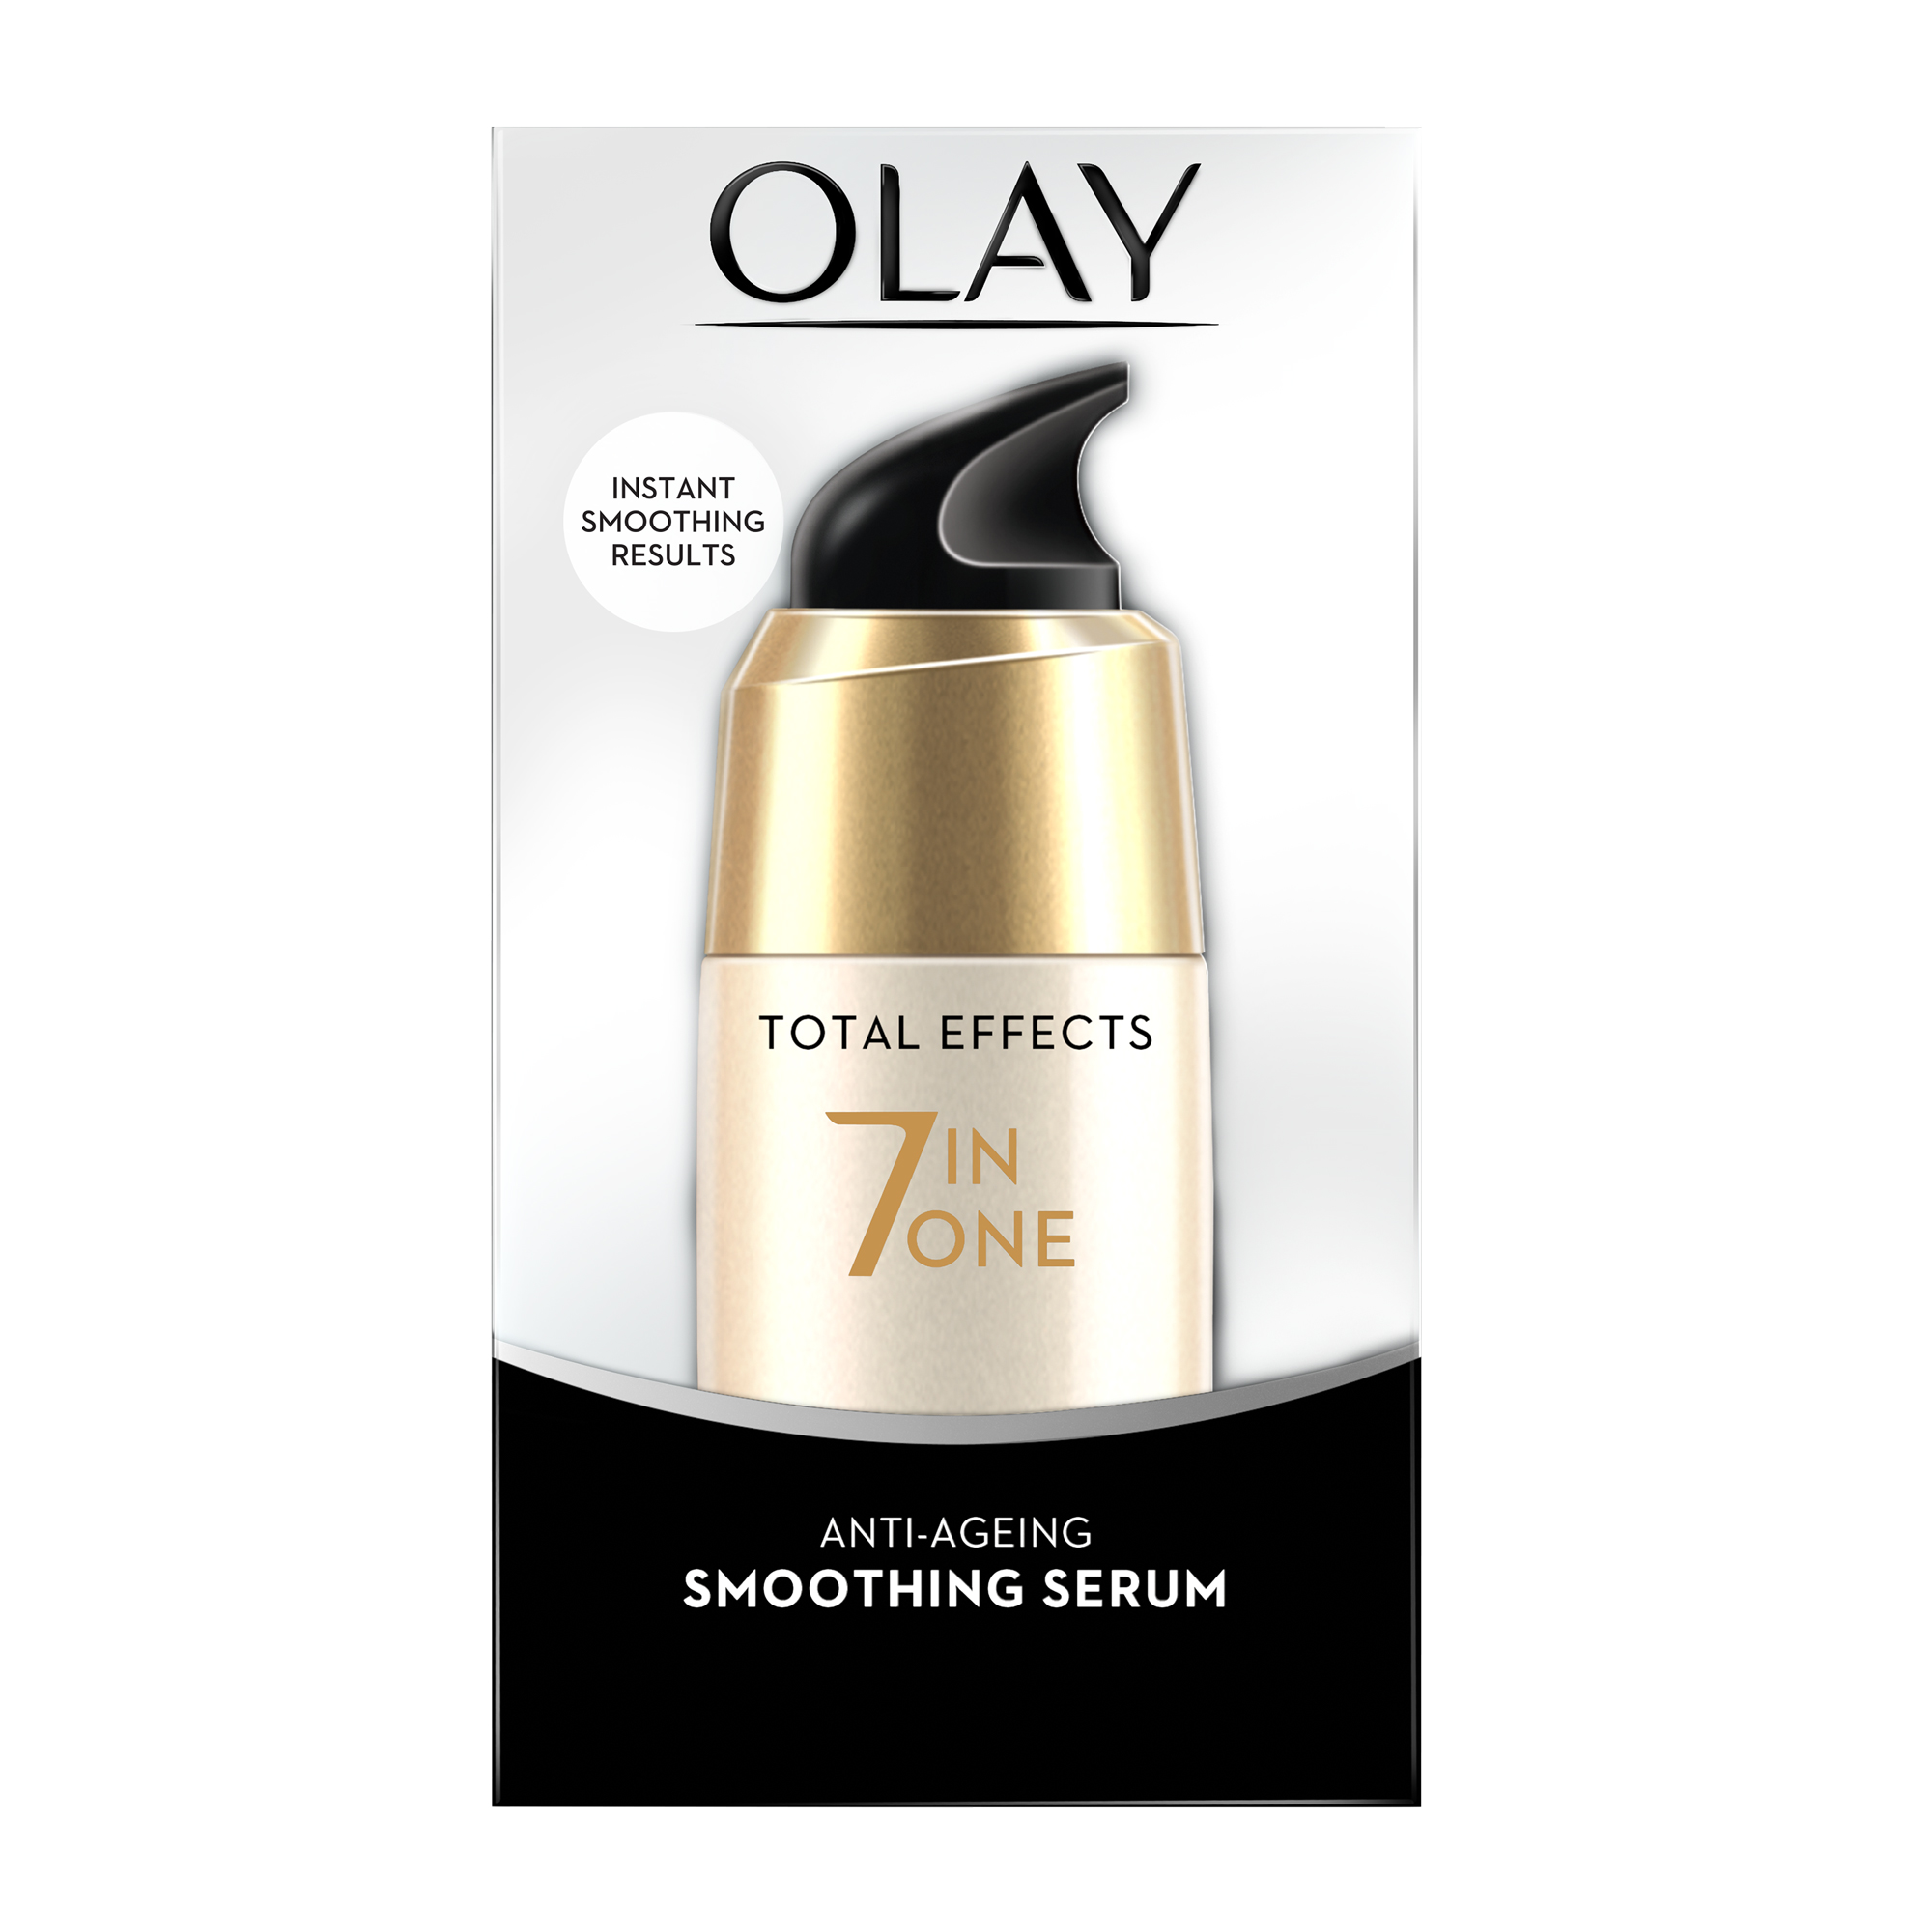 Olay Total Effects 7 in One Anti-Ageing Regimen Anniversary Gift Pouch